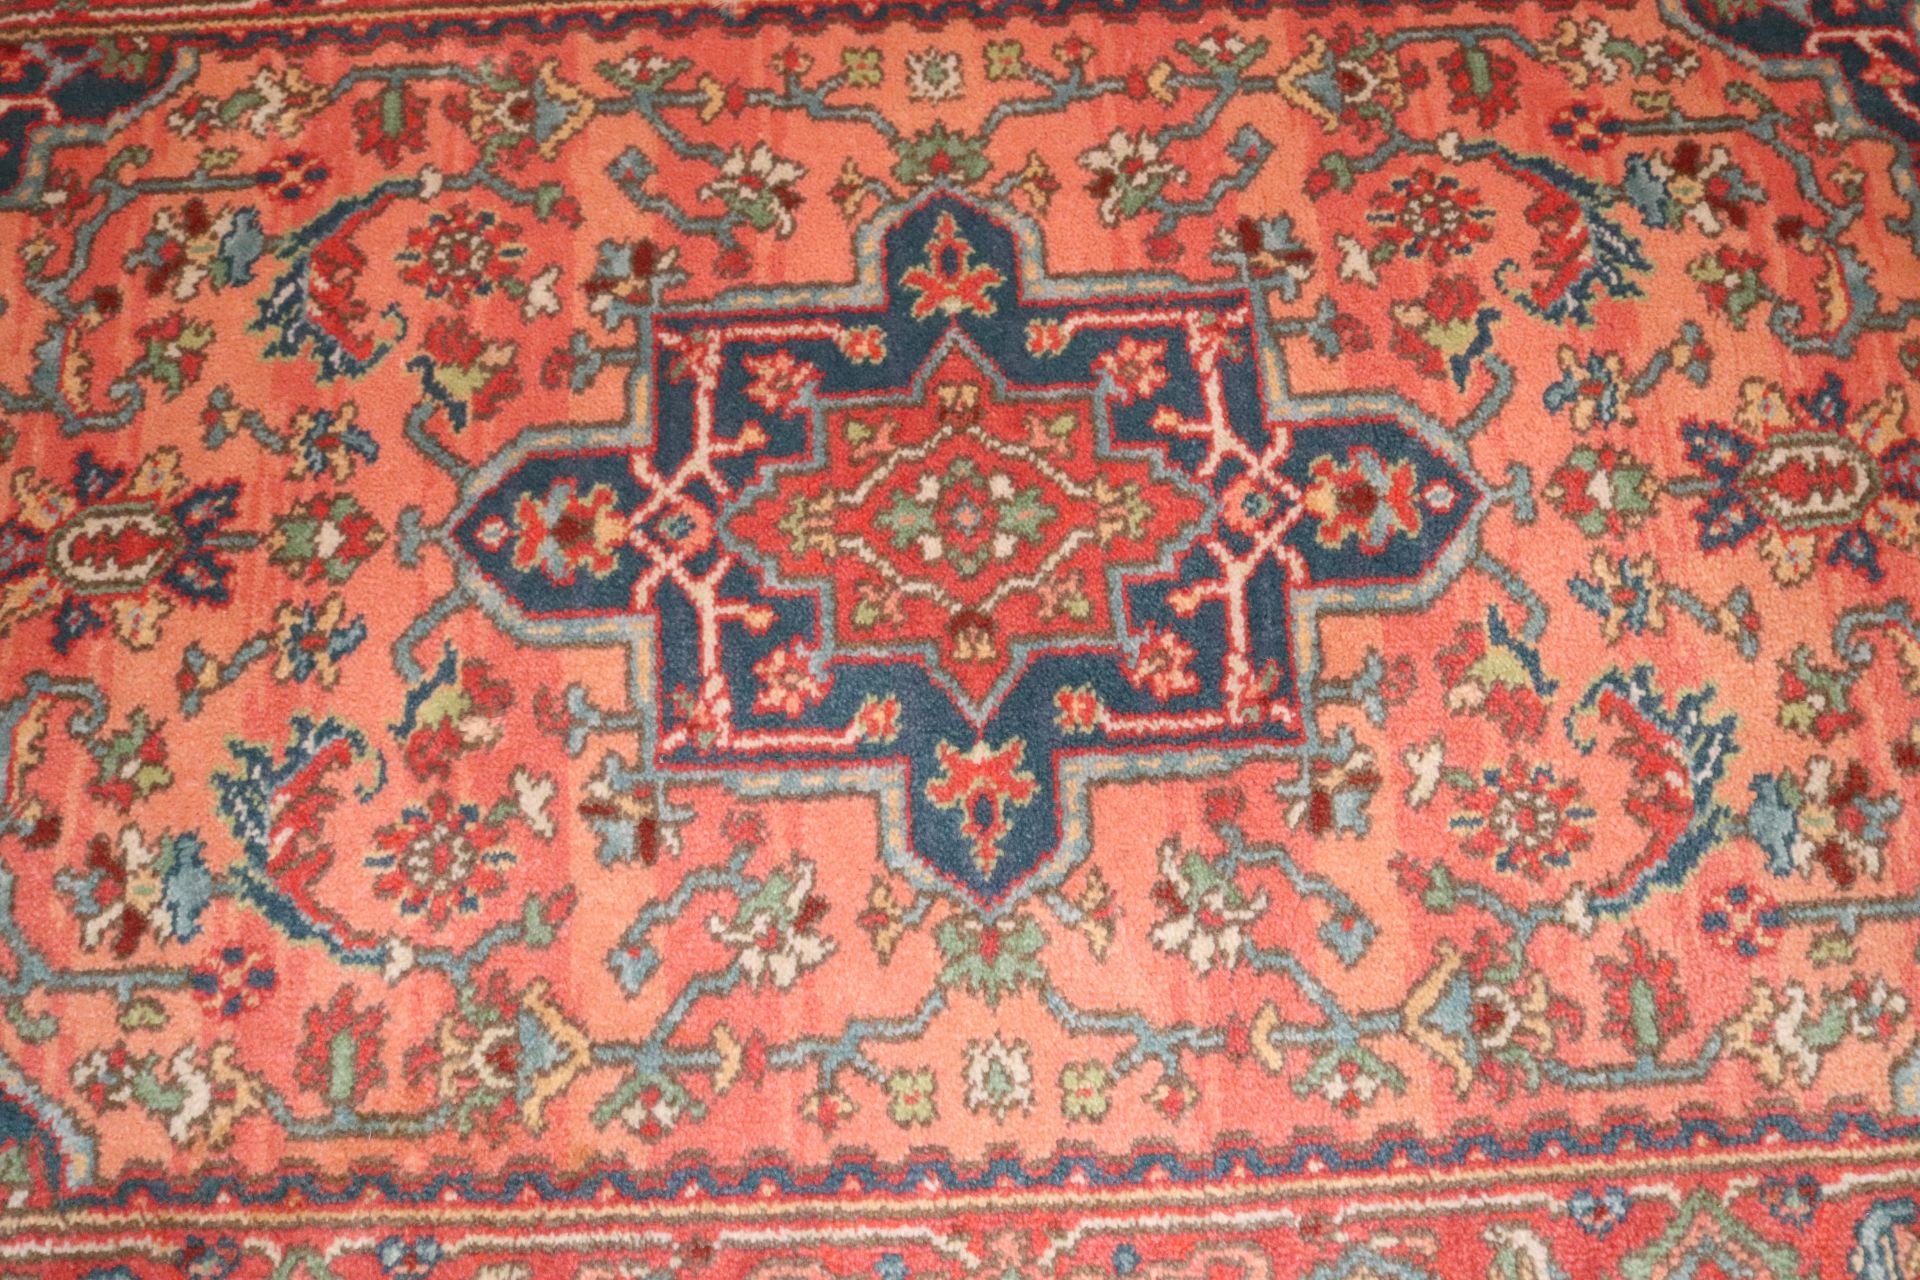 Pair of matching Oriental rugs, 61" x 35" - Image 2 of 2